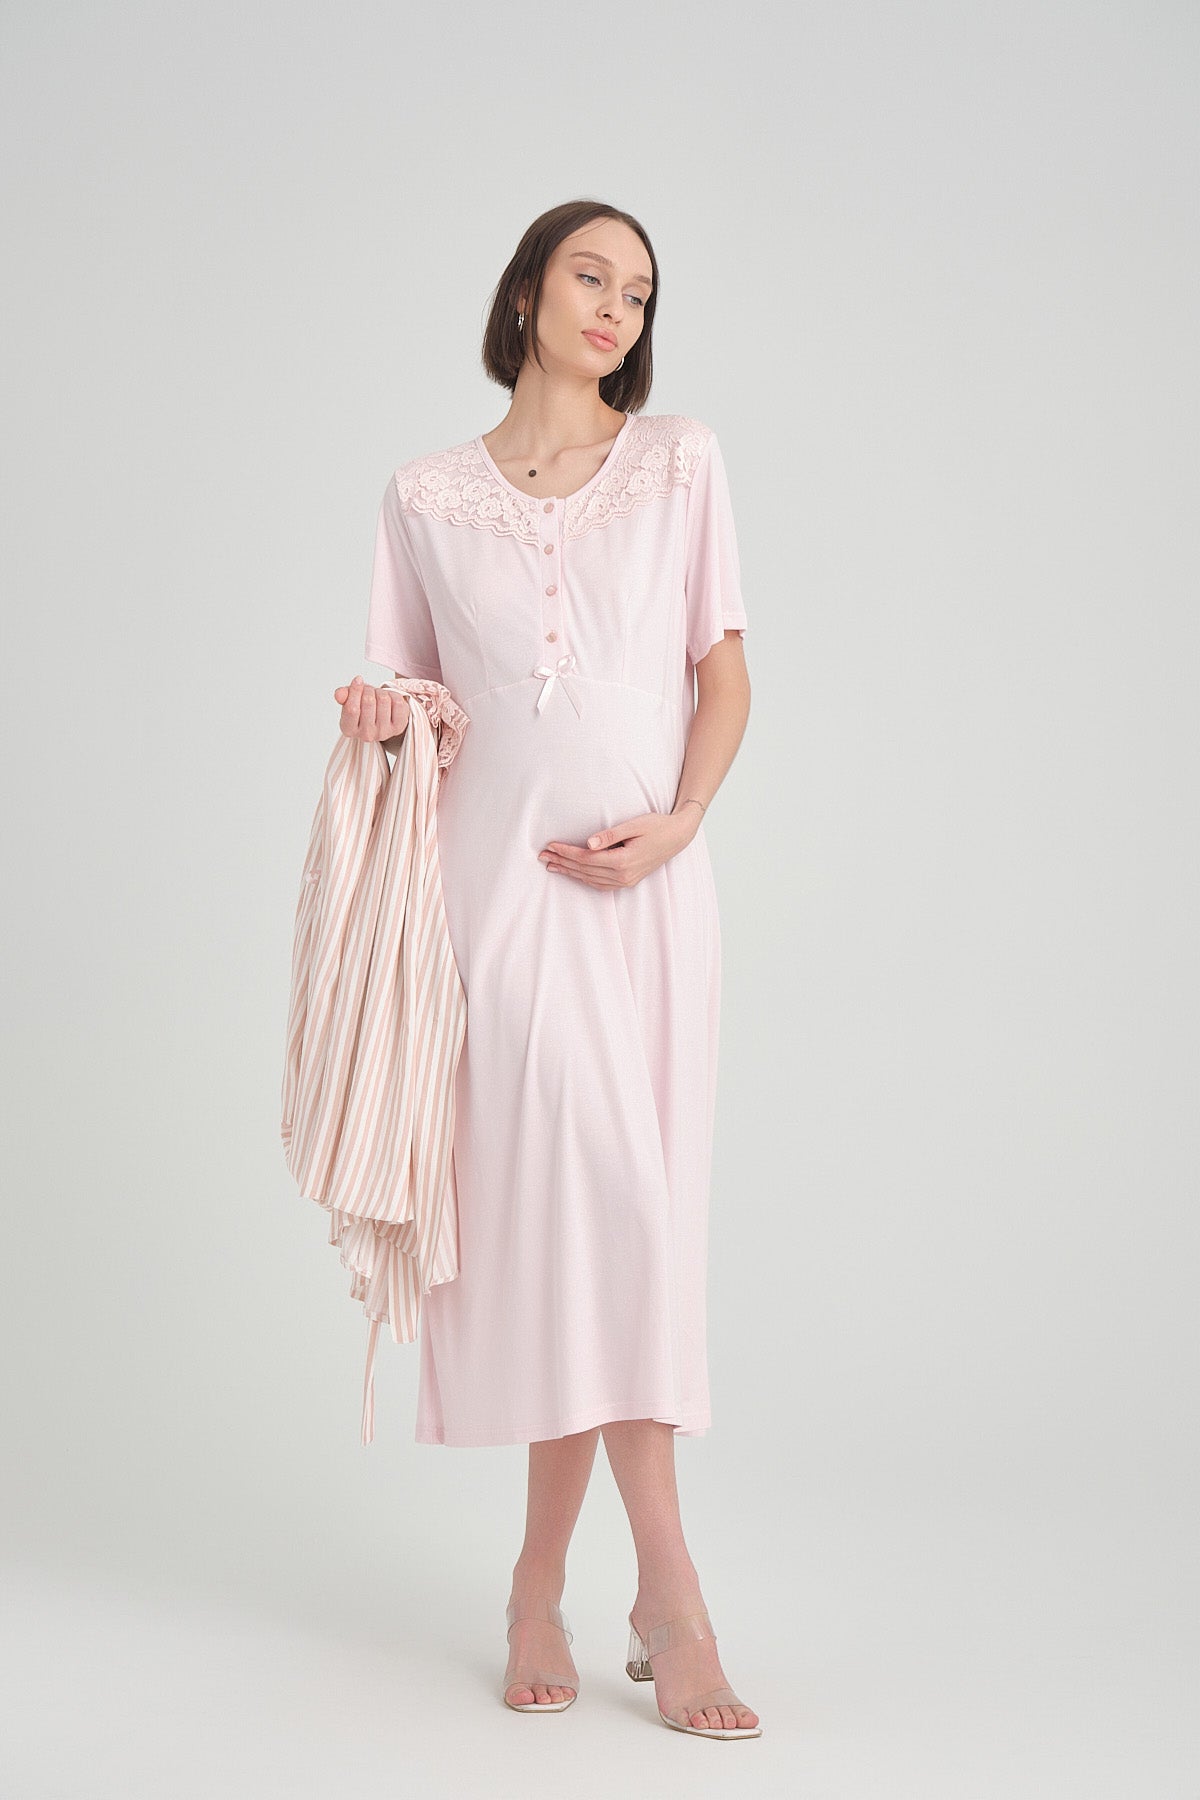 Shopymommy 2386 Lace Collar Maternity & Nursing Nightgown With Stripe Robe Pink